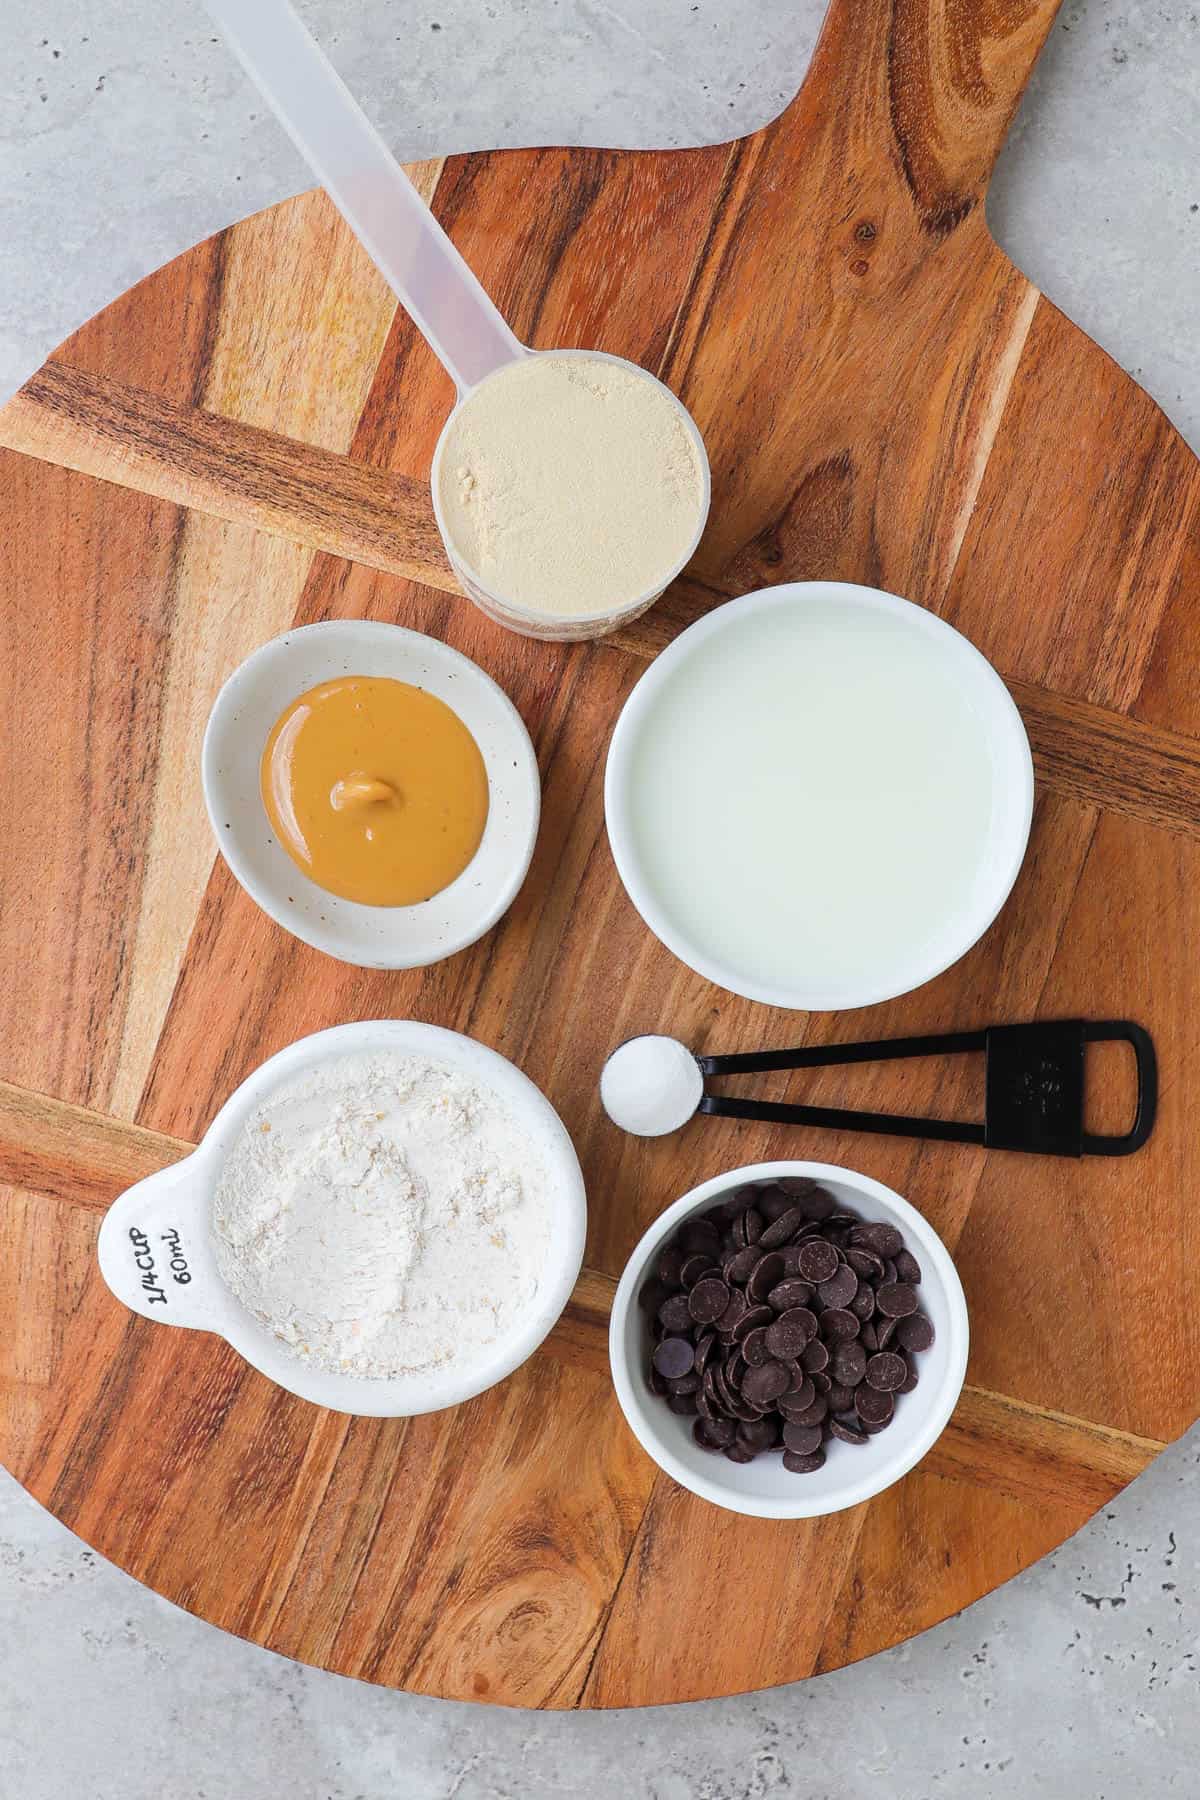 Ingredients for the cookie.